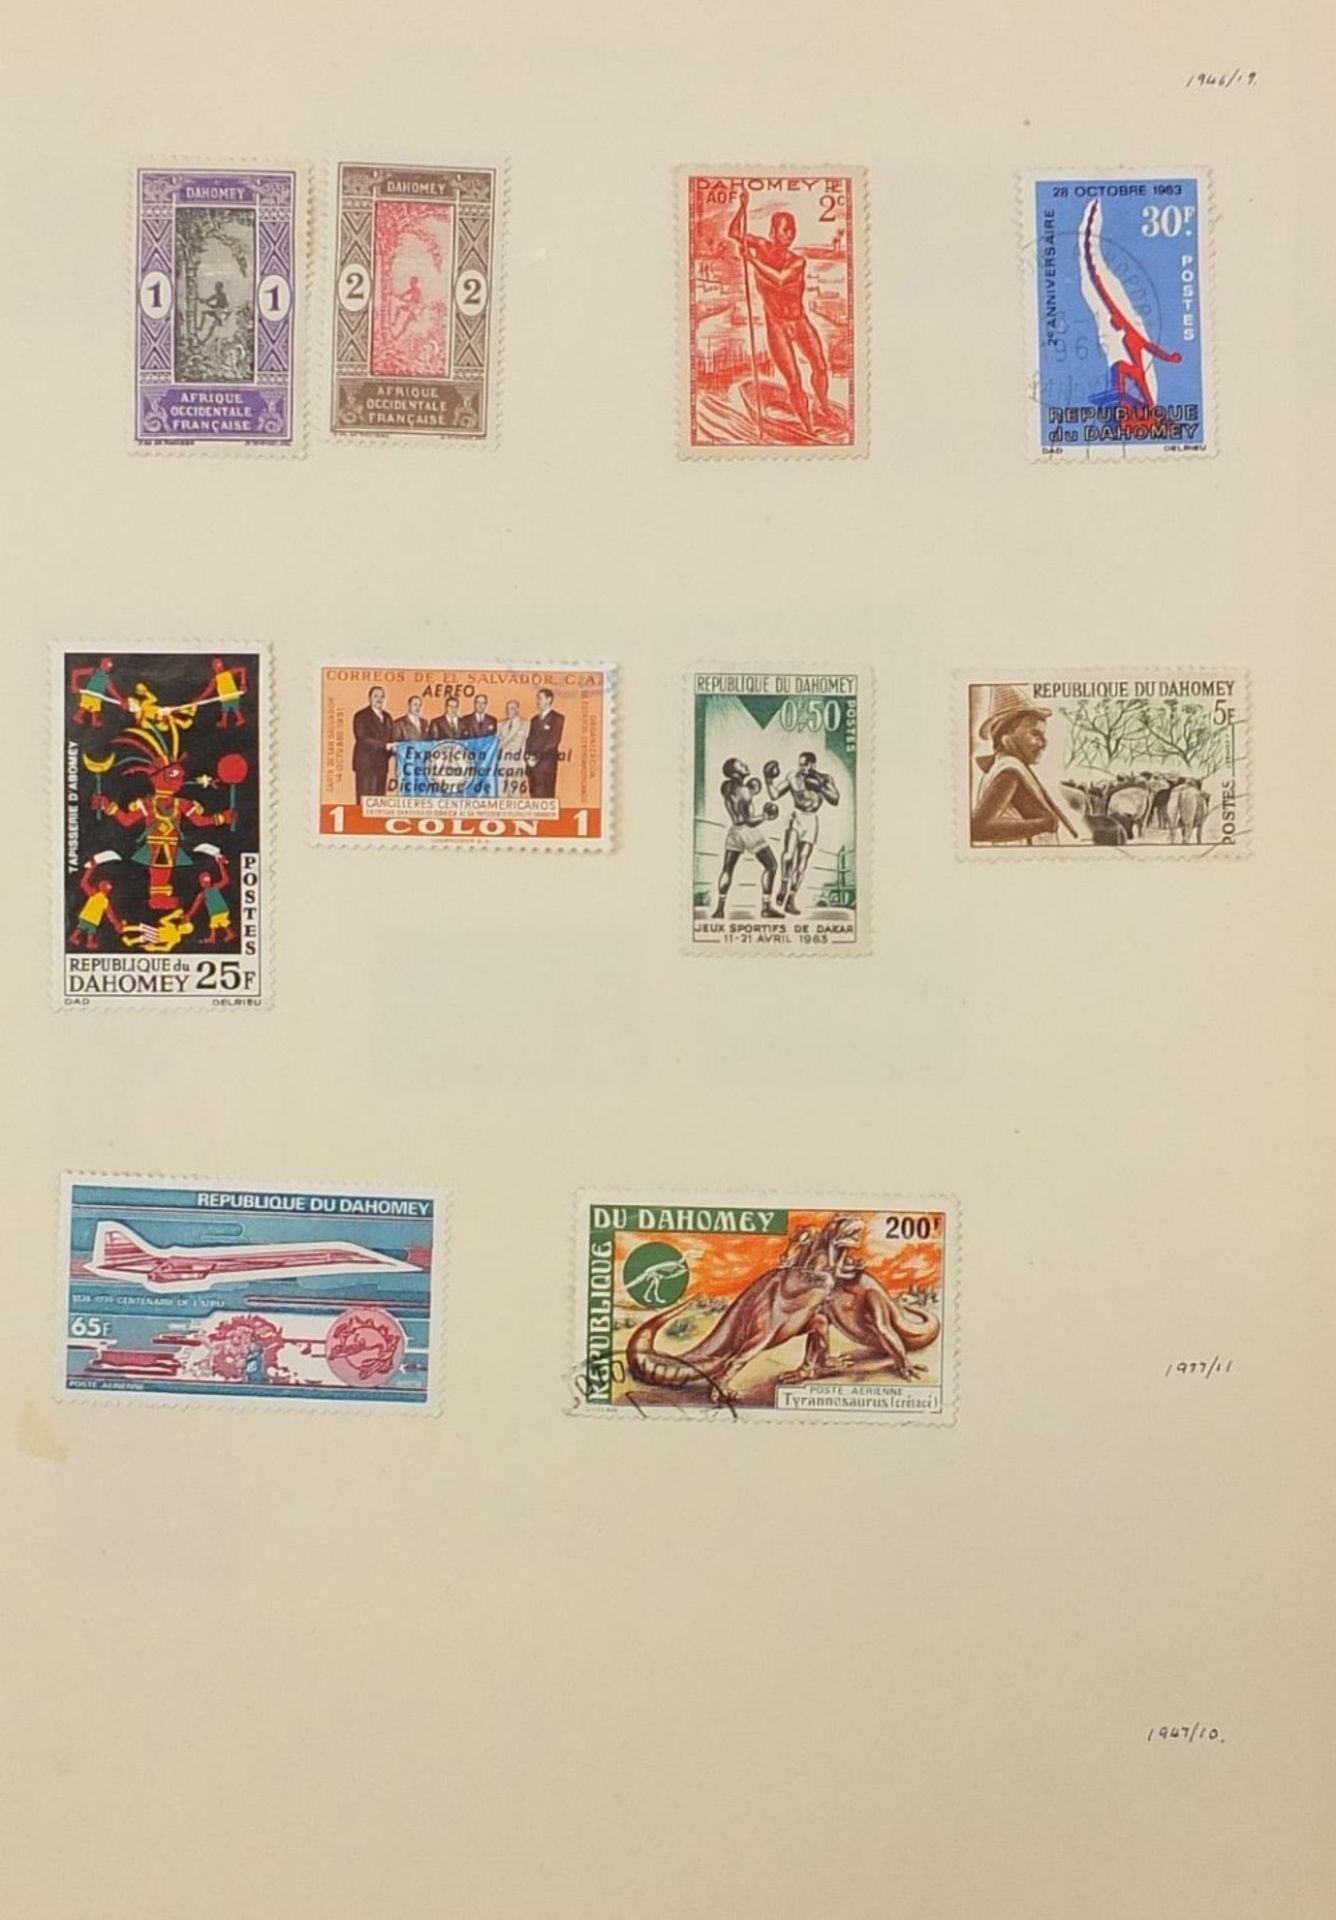 Extensive collection of antique and later world stamps arranged in albums including Brazil, - Image 35 of 52